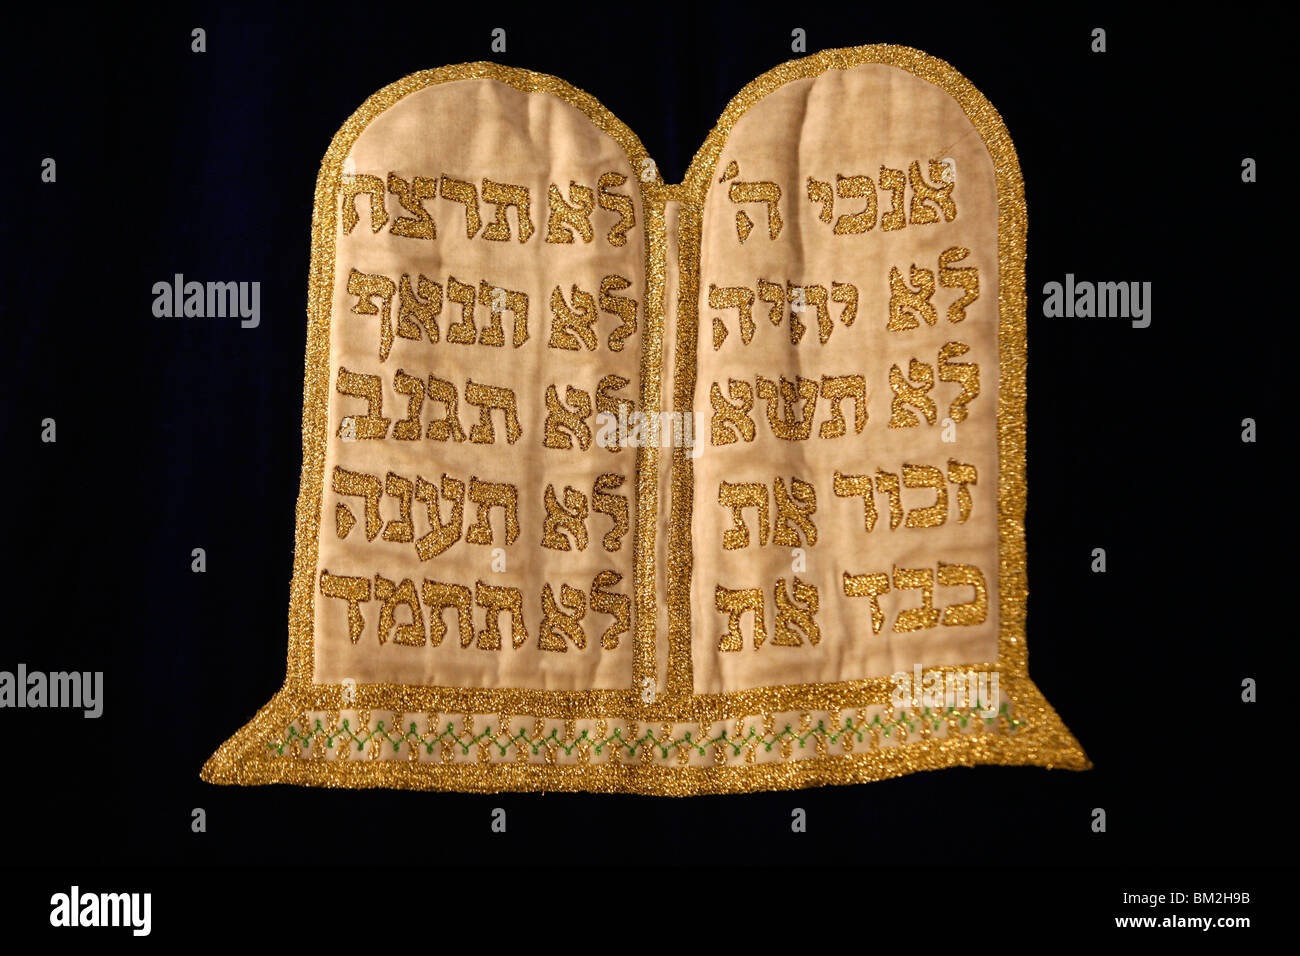 Tables of the Law embroidery in Stadttempel Synagogue, Vienna, Austria Stock Photo